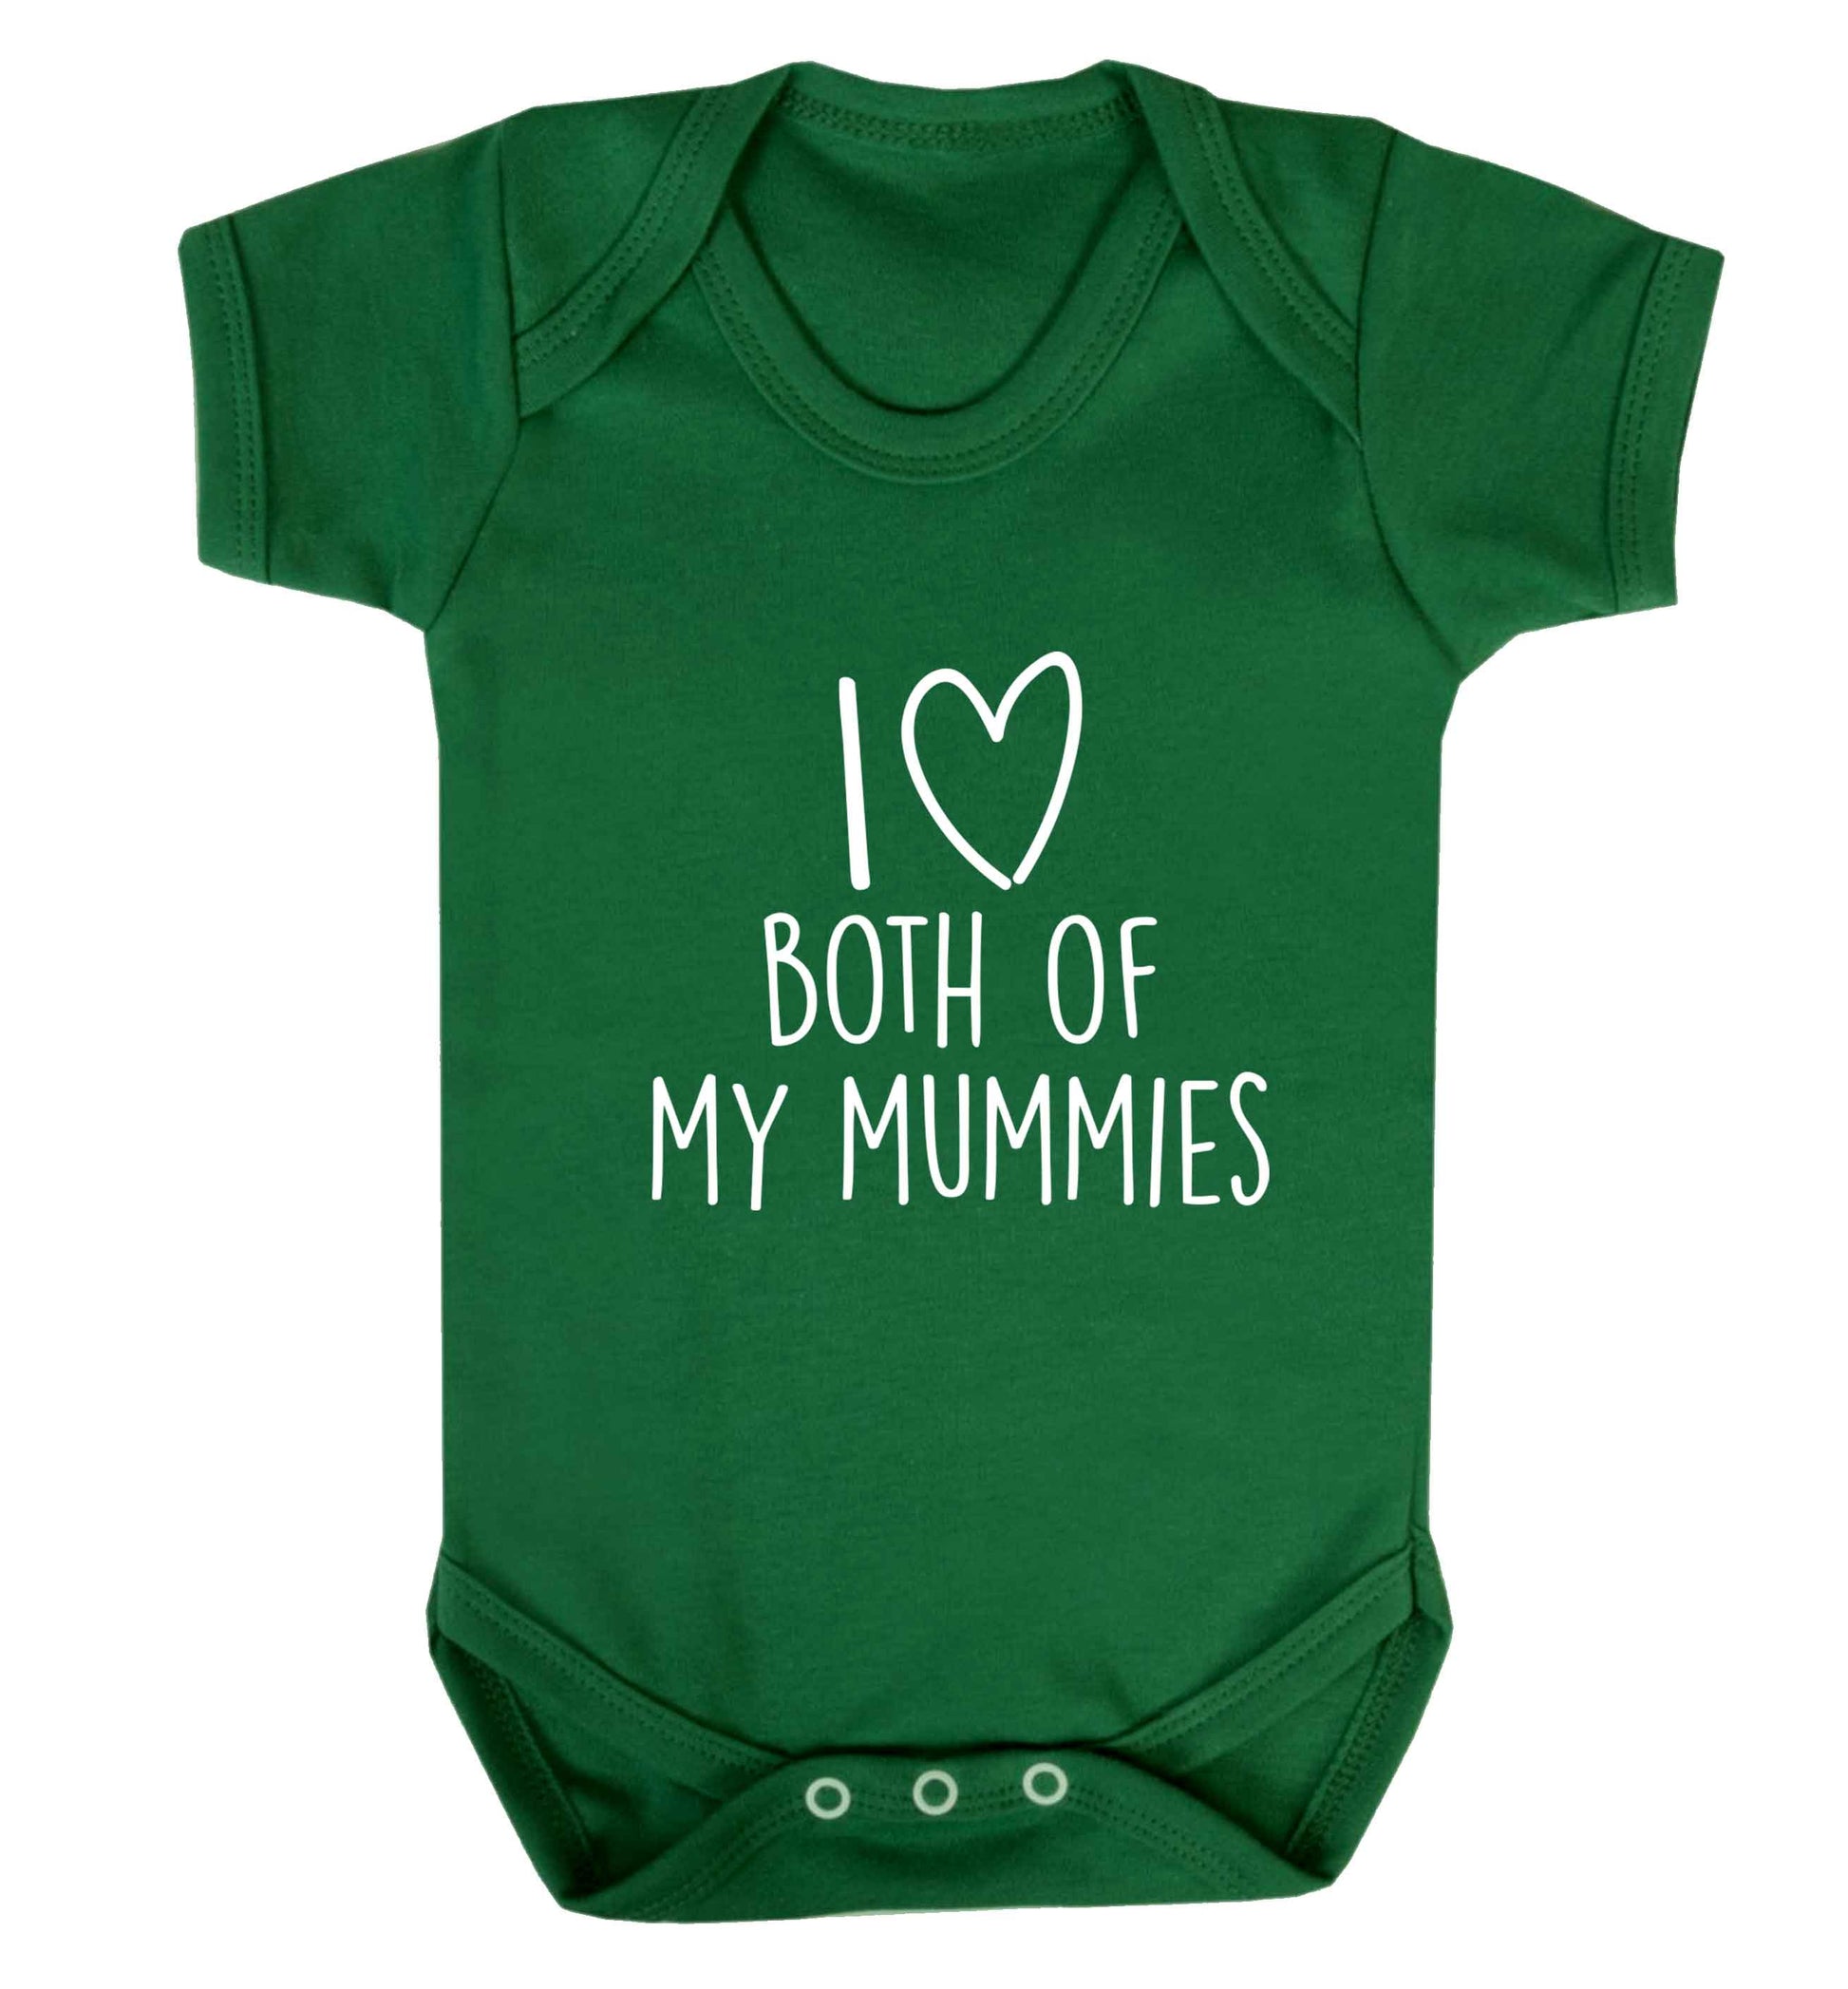 I love both of my mummies baby vest green 18-24 months